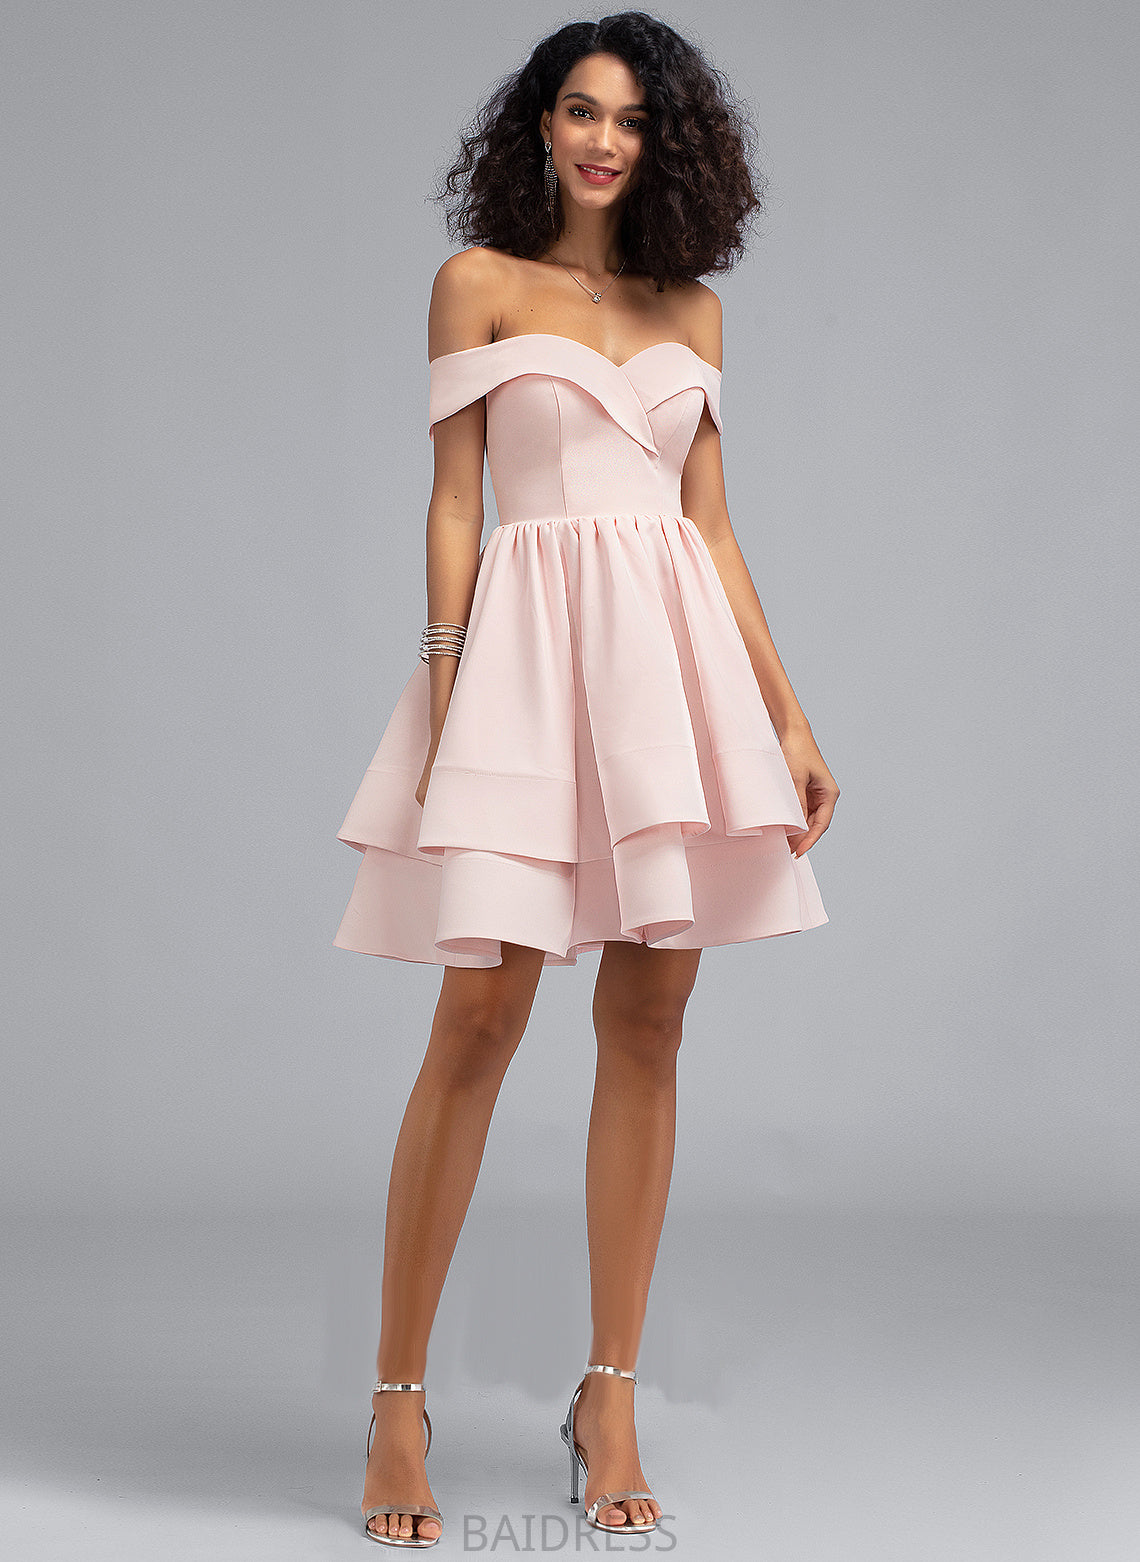 Short/Mini Stretch Juliette Ruffles Prom Dresses Cascading Off-the-Shoulder With A-Line Crepe